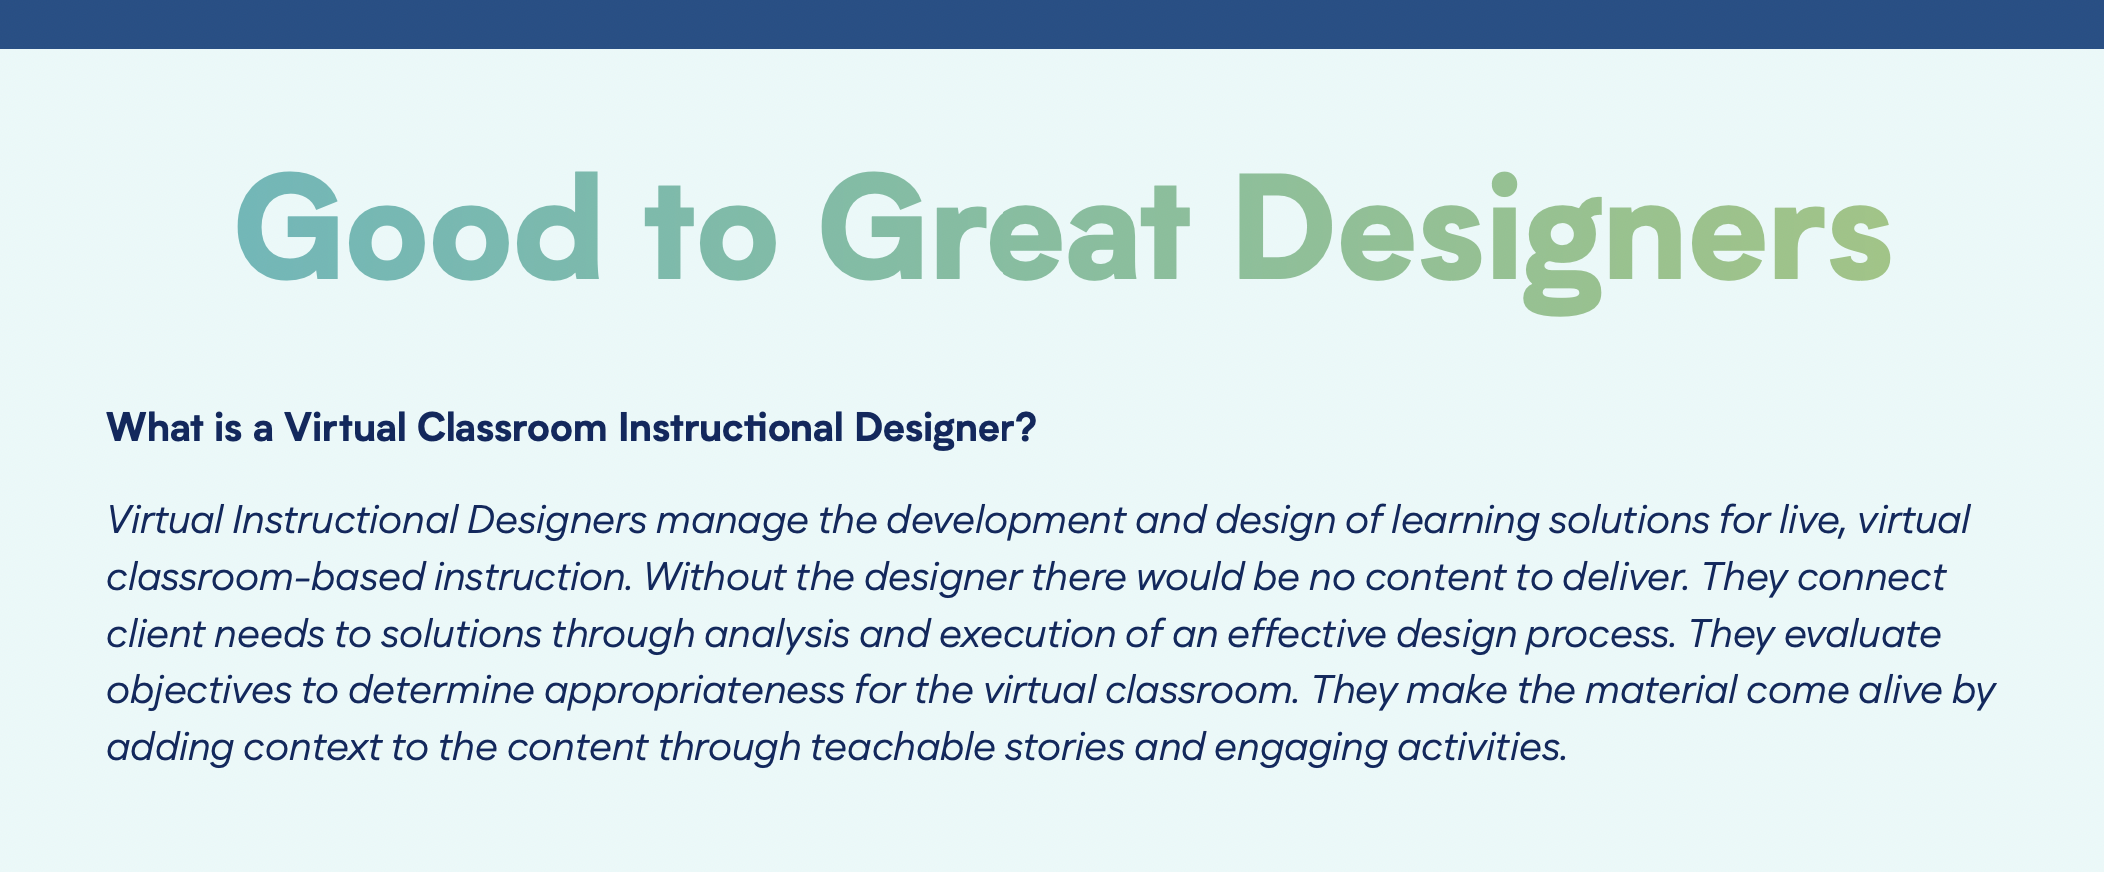 Virtual Classroom Instructional Designers - What Makes Them Great?